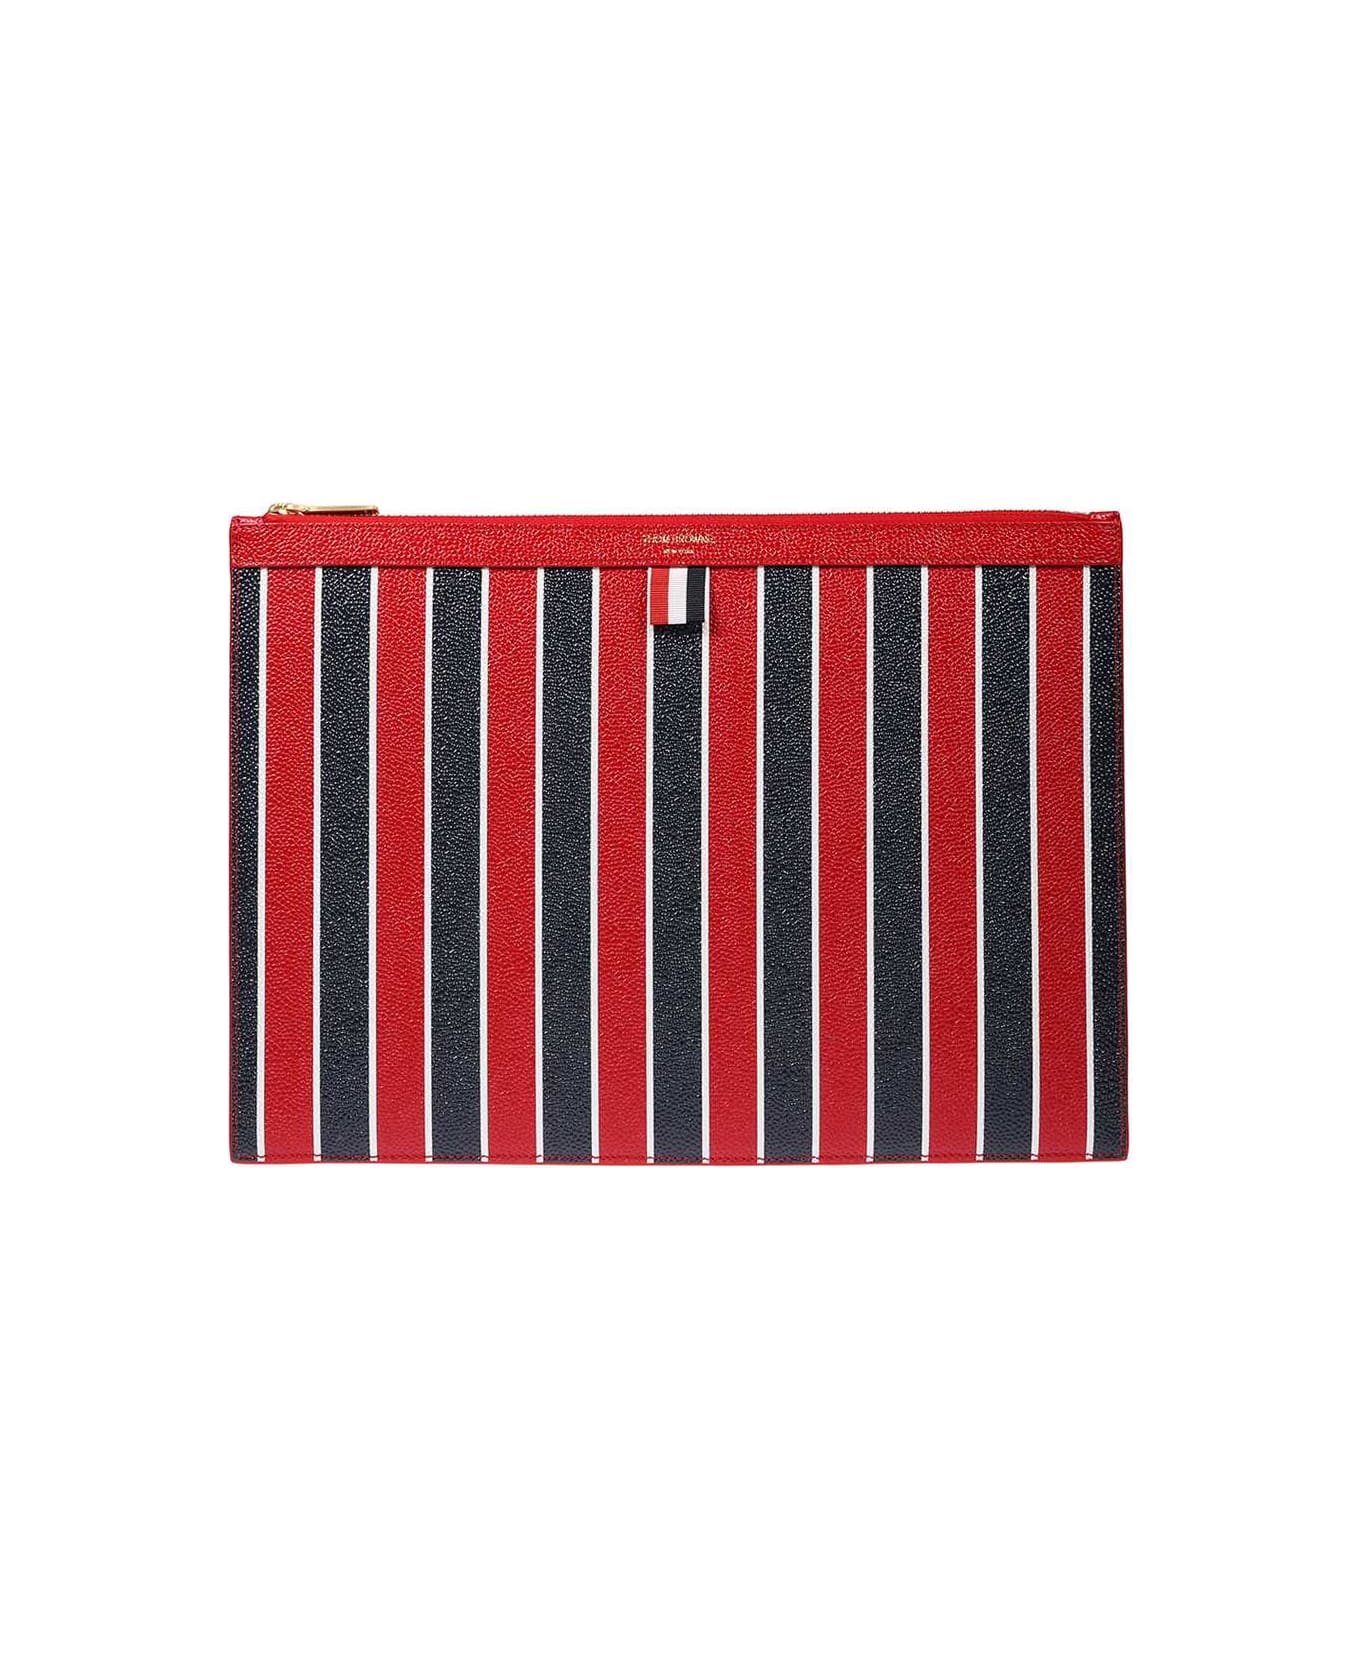 Thom Browne Leather Flat Pouch - Multicolor